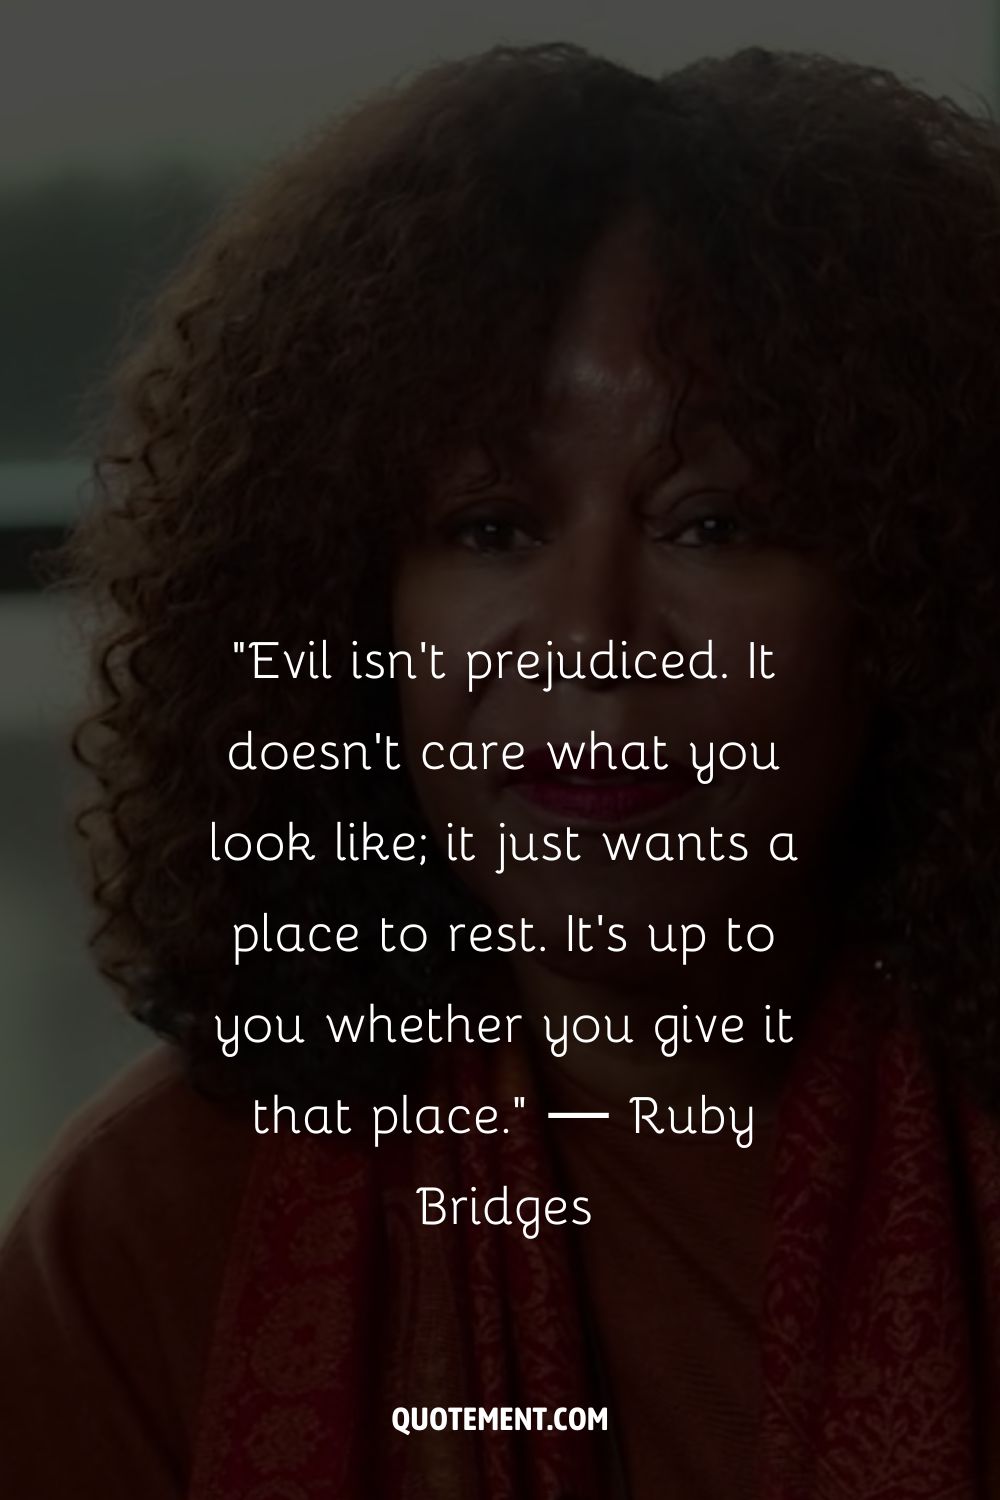 Evil isn't prejudiced. It doesn't care what you look like